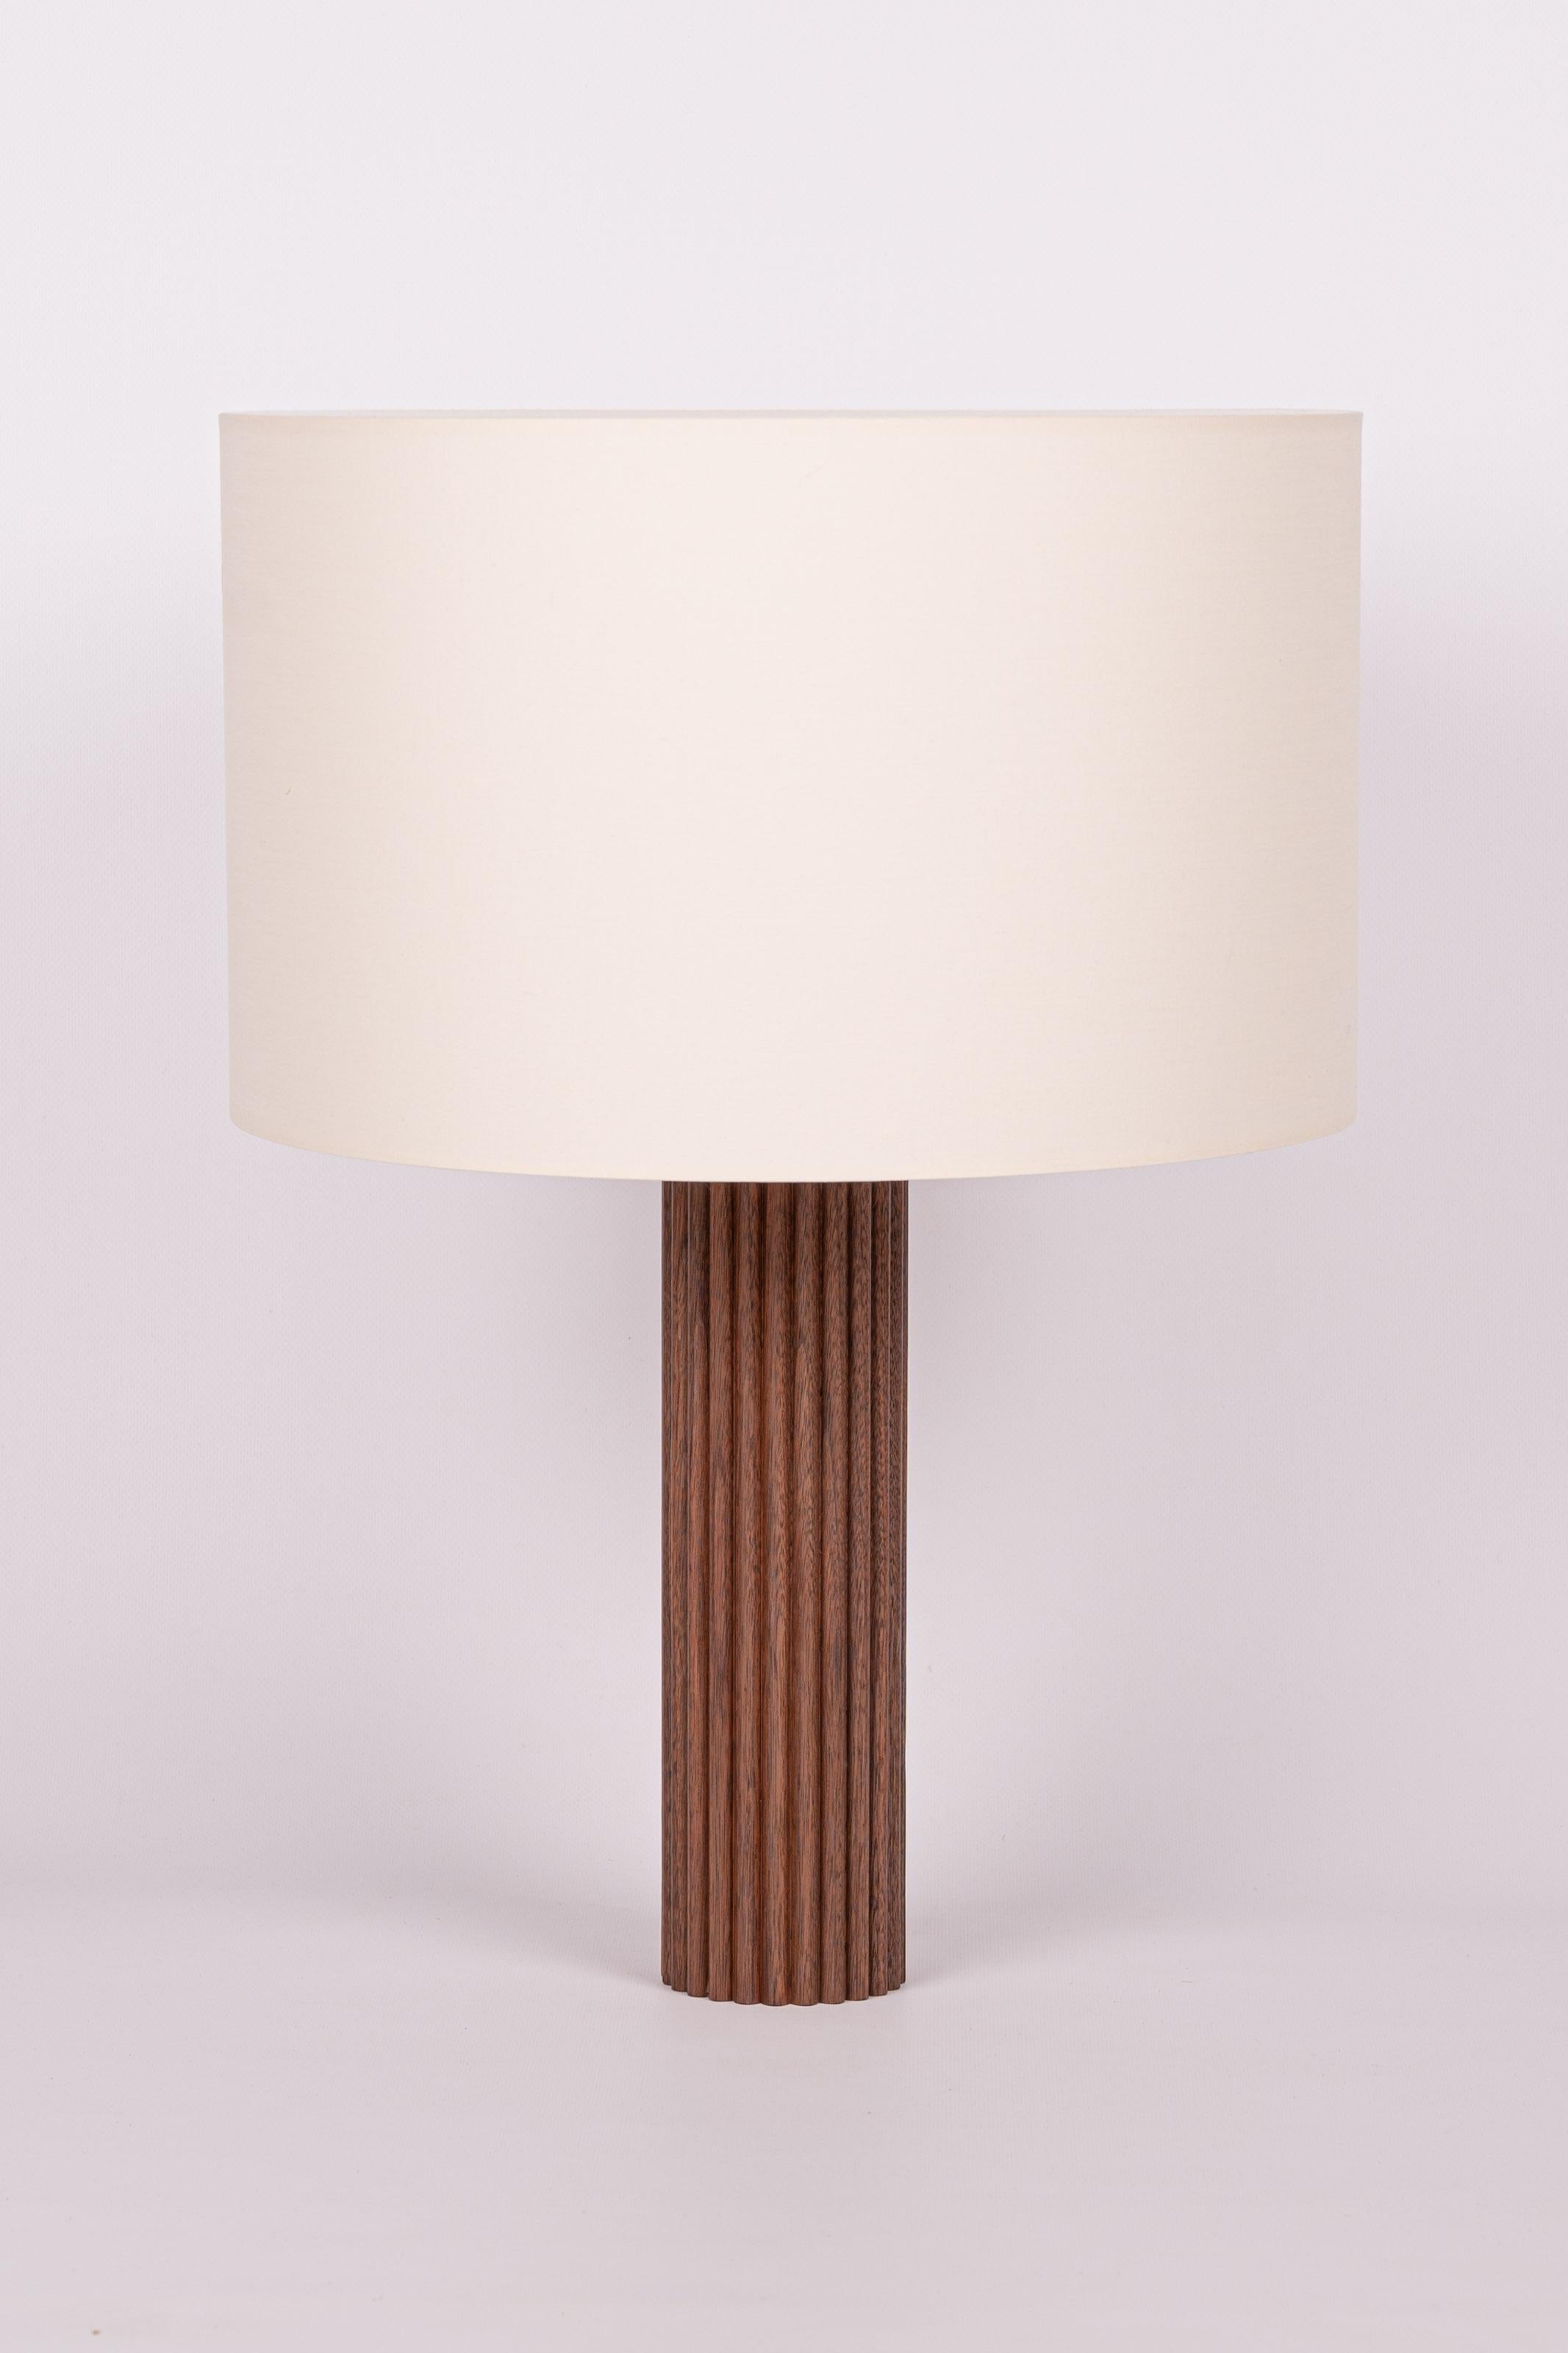 Walnut  Fluta Table Lamp by Simone & Marcel
Dimensions: Ø 40 x H 58 cm.
Materials: Cotton and walnut.

Also available in different marble and wood options and finishes. Custom options available on request. Please contact us. 

All our lamps can be